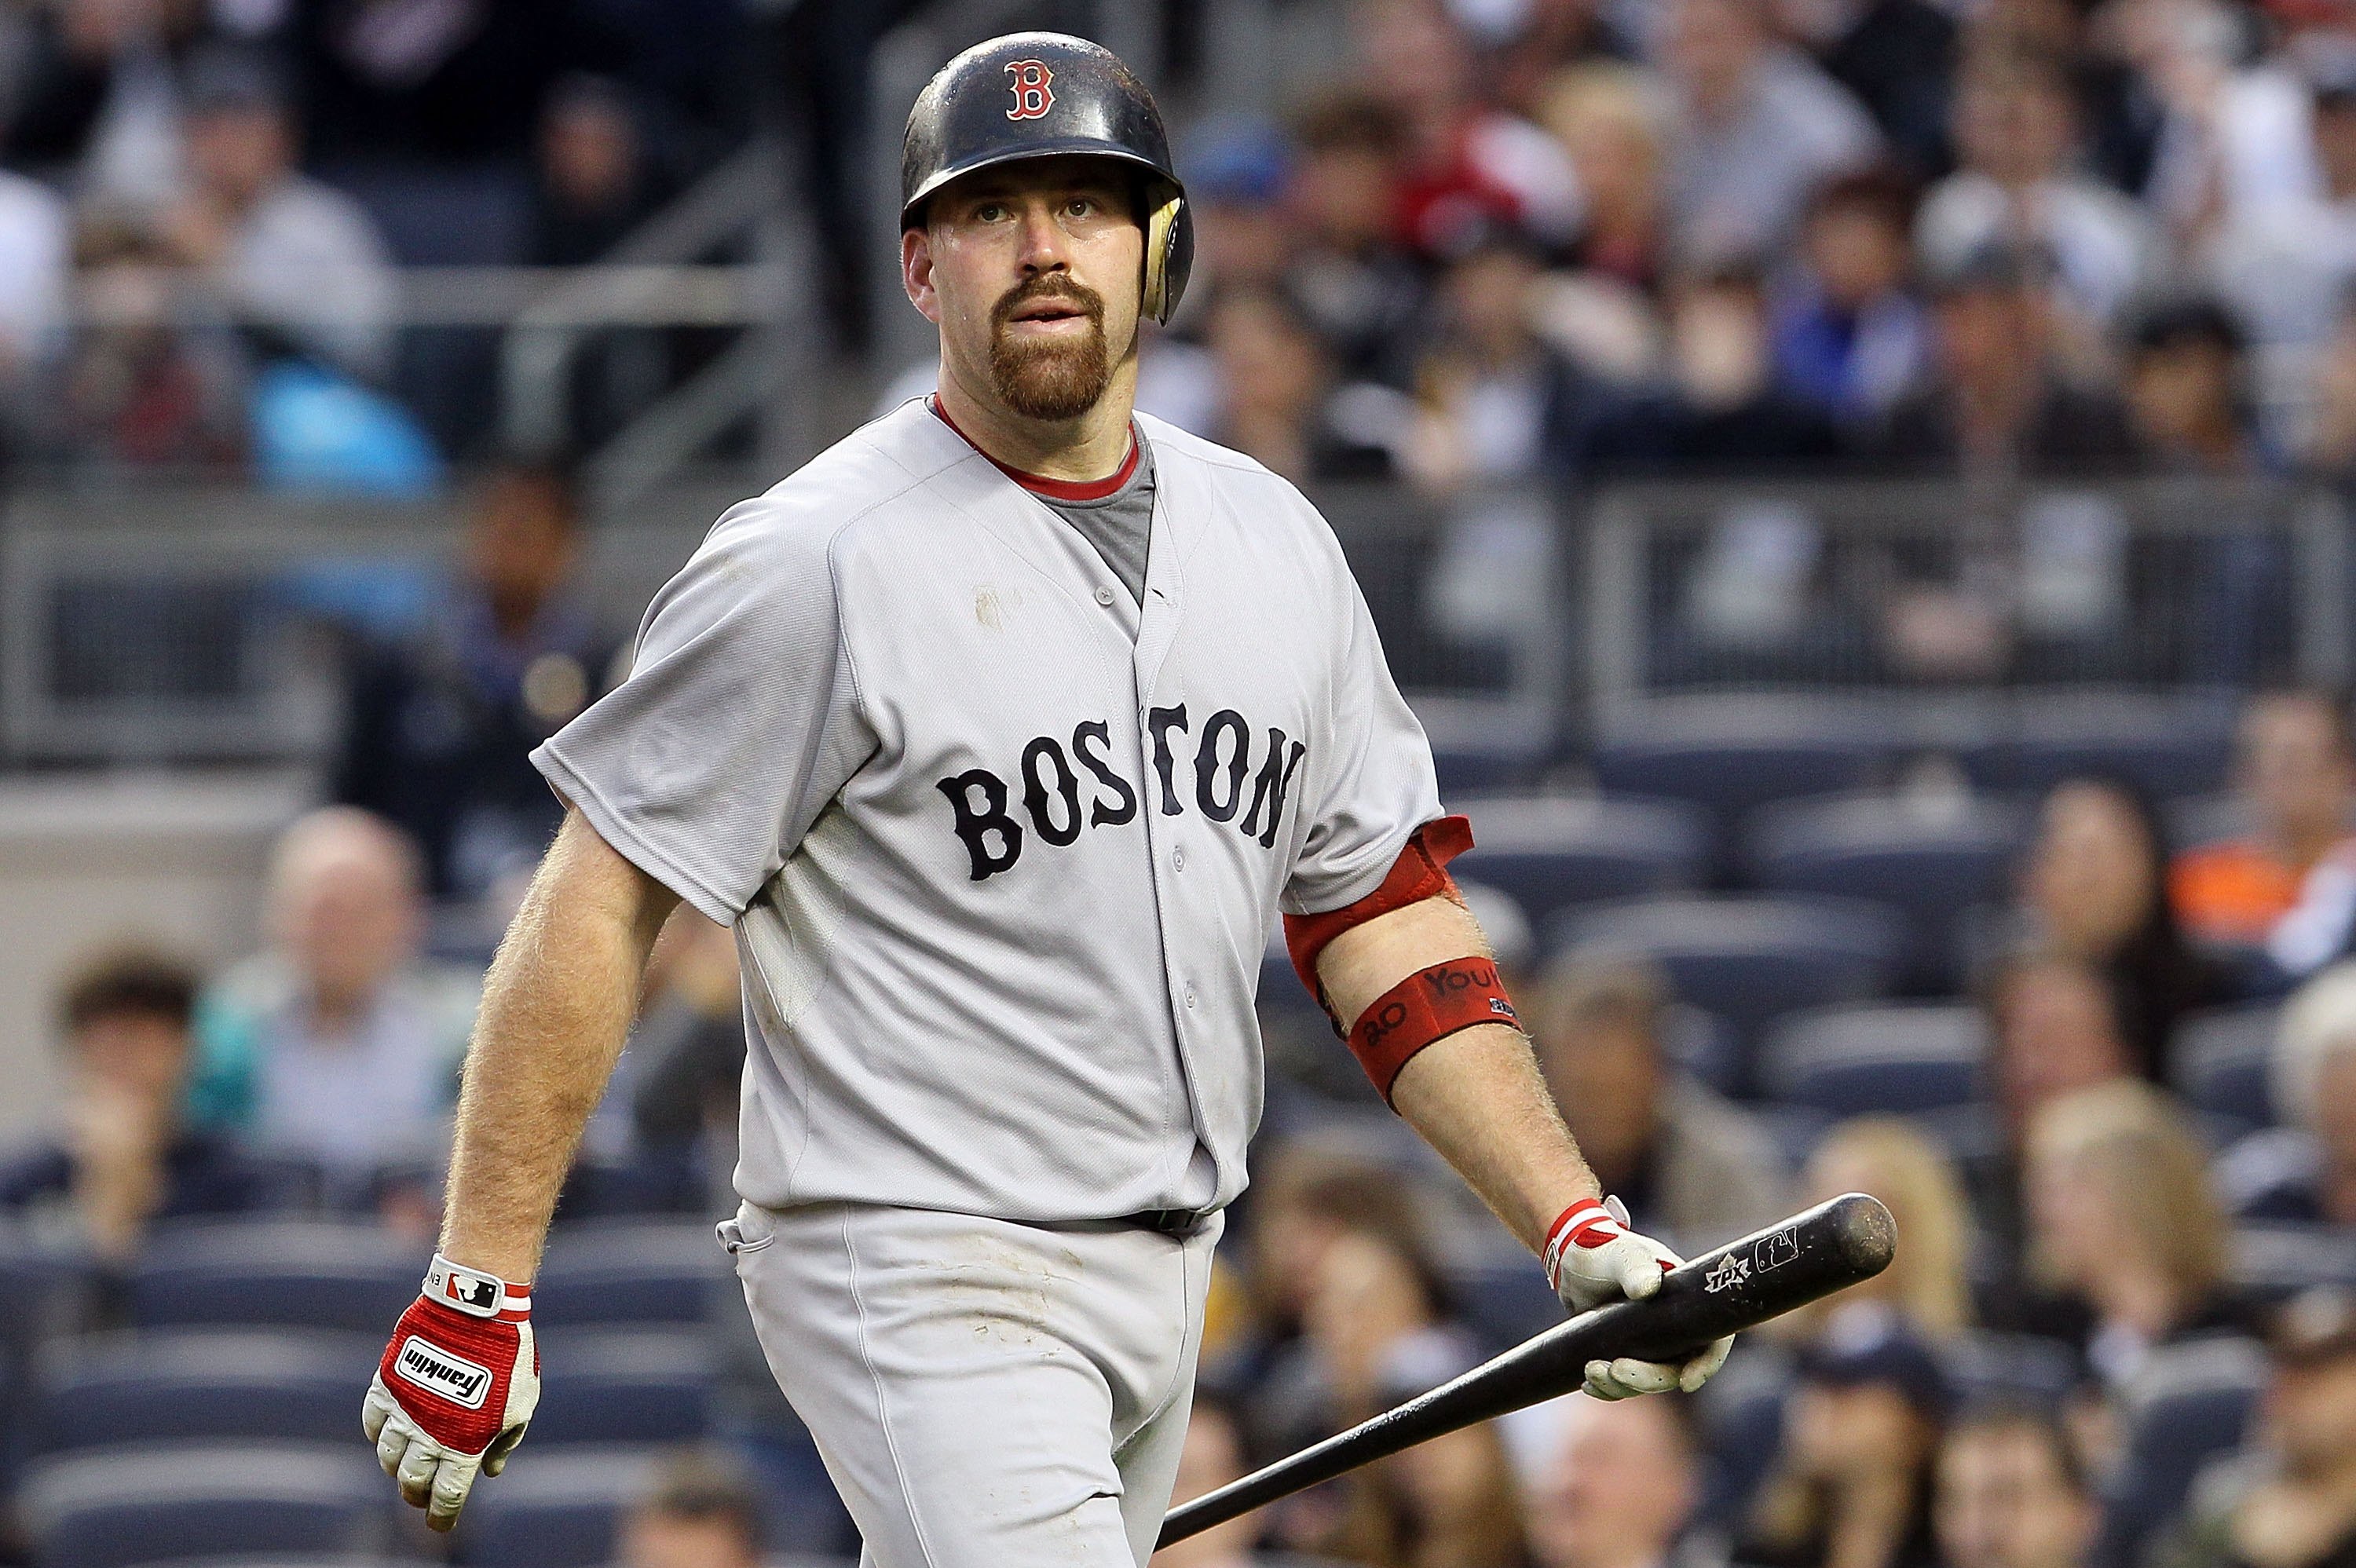 Yankees Offer Kevin Youkilis $12 Million for One Year - The New